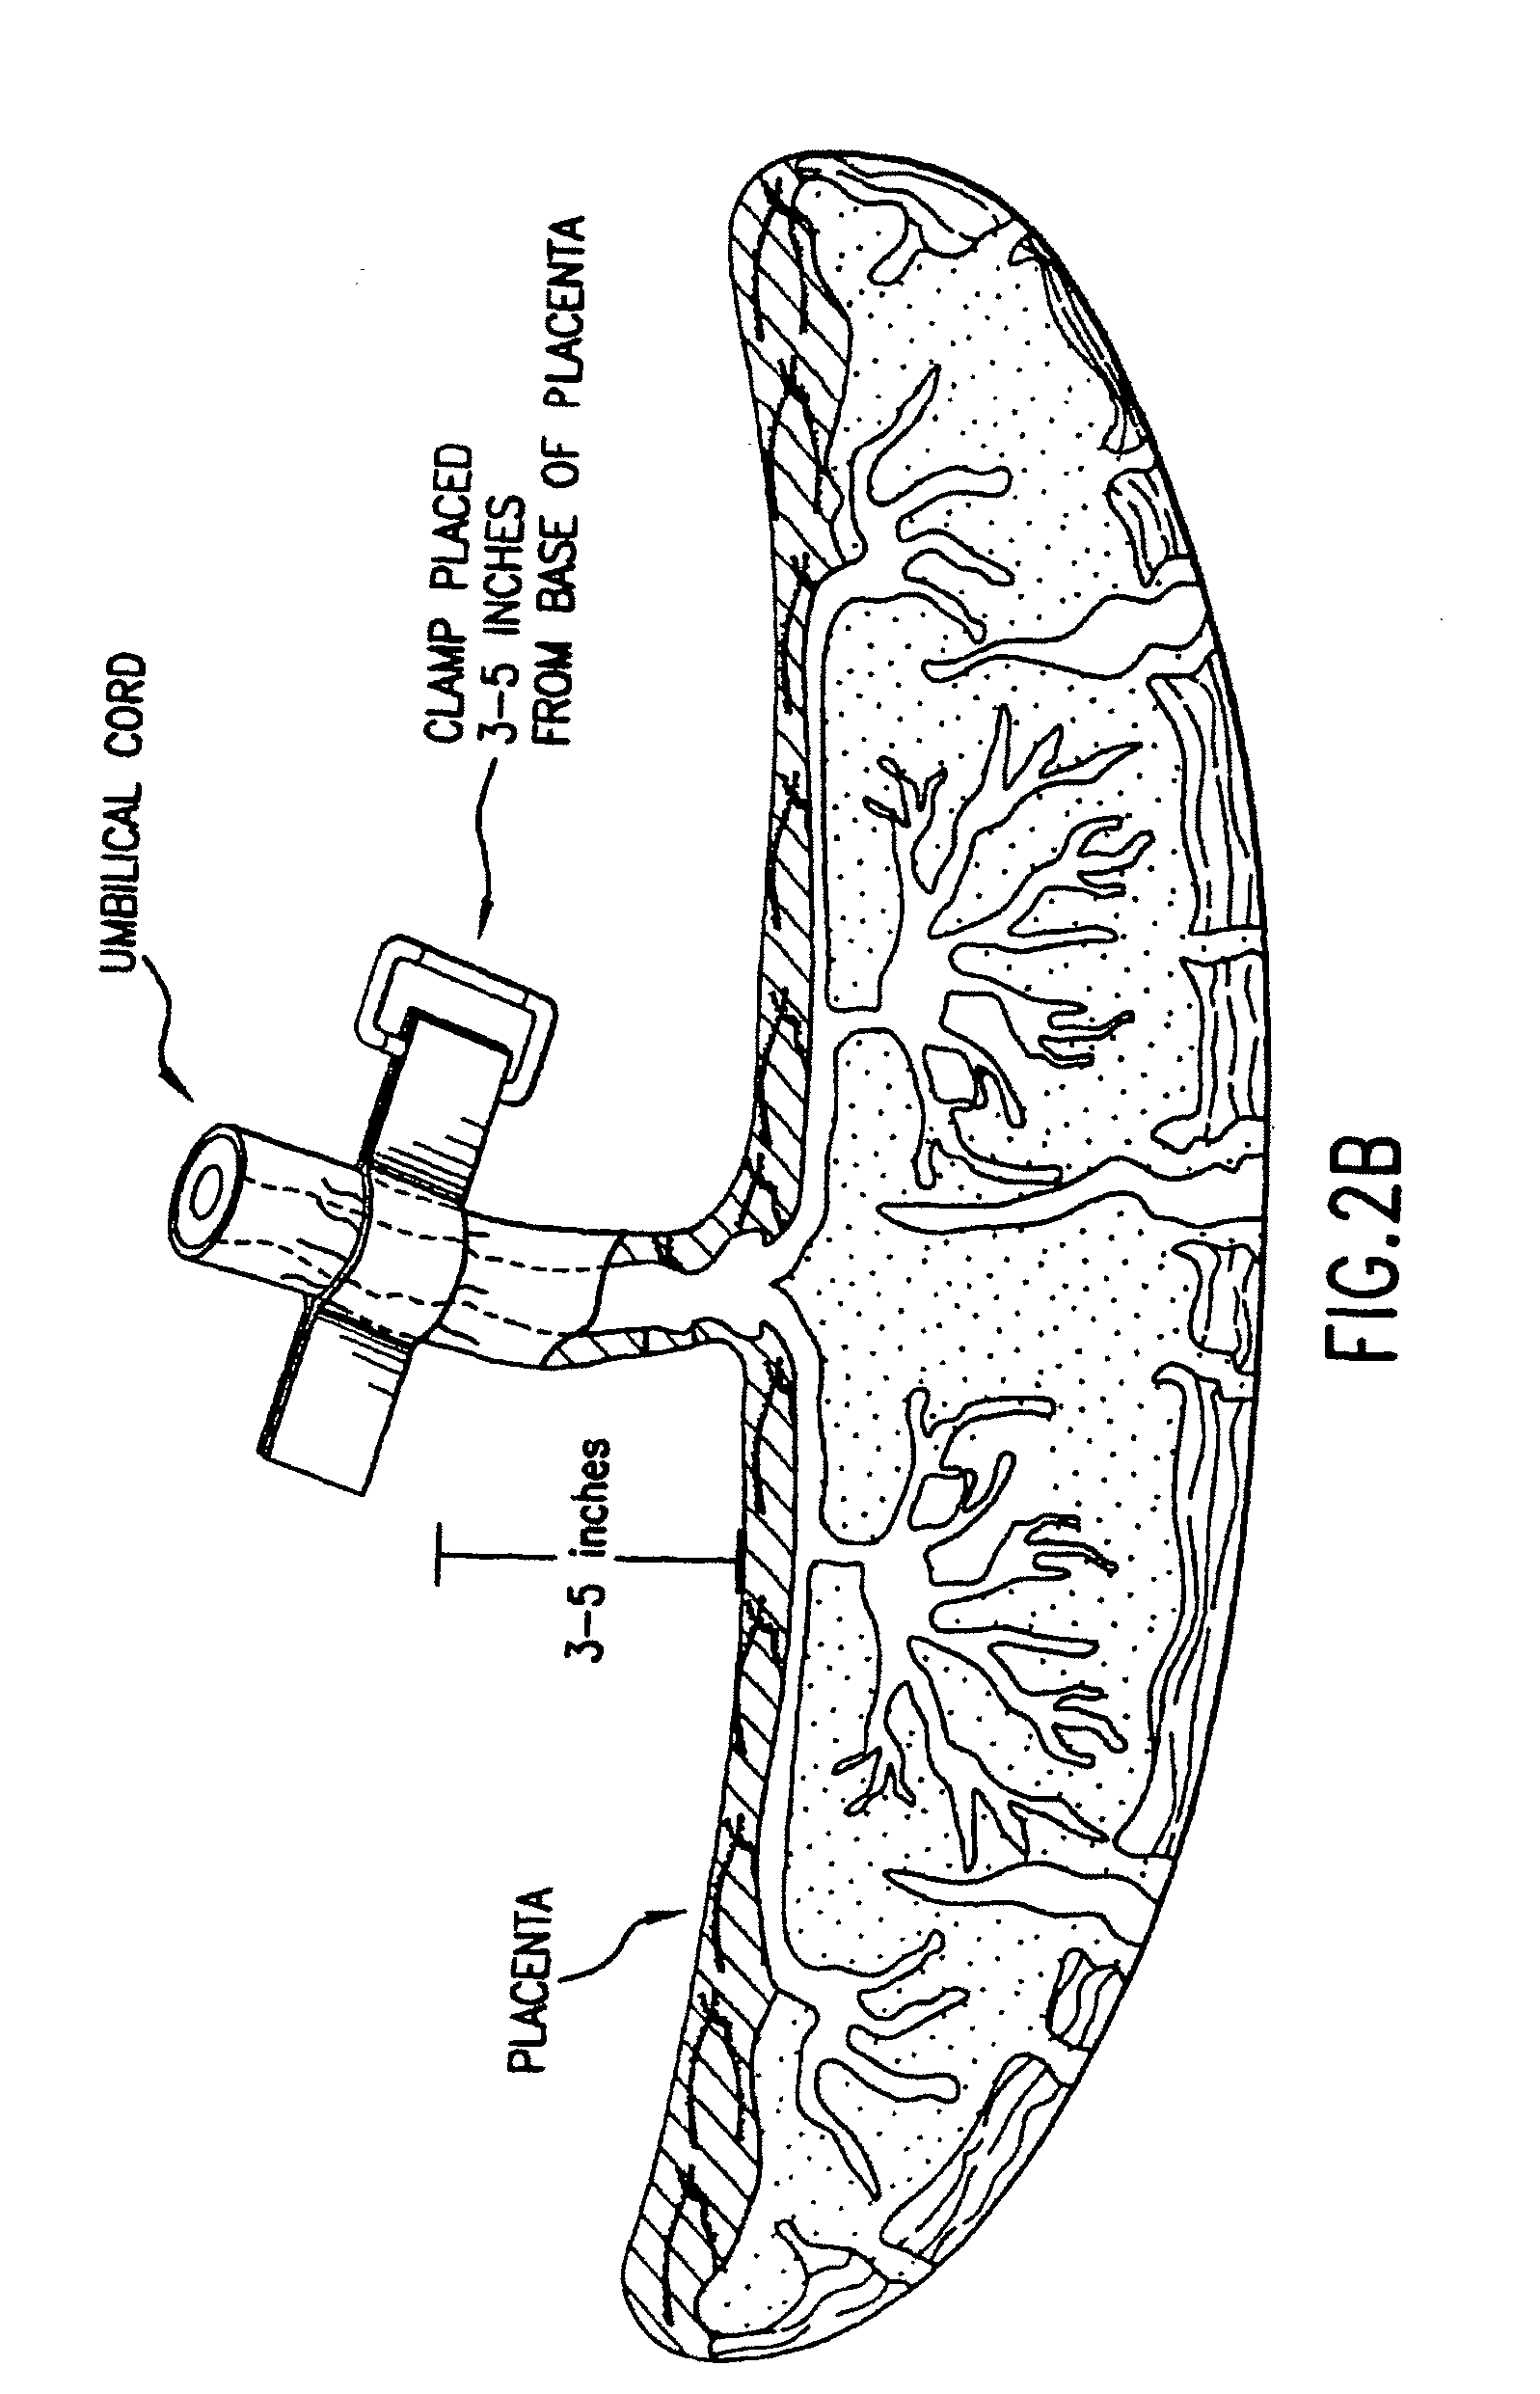 Composition for collecting and preserving placental stem cells and methods of using the composition